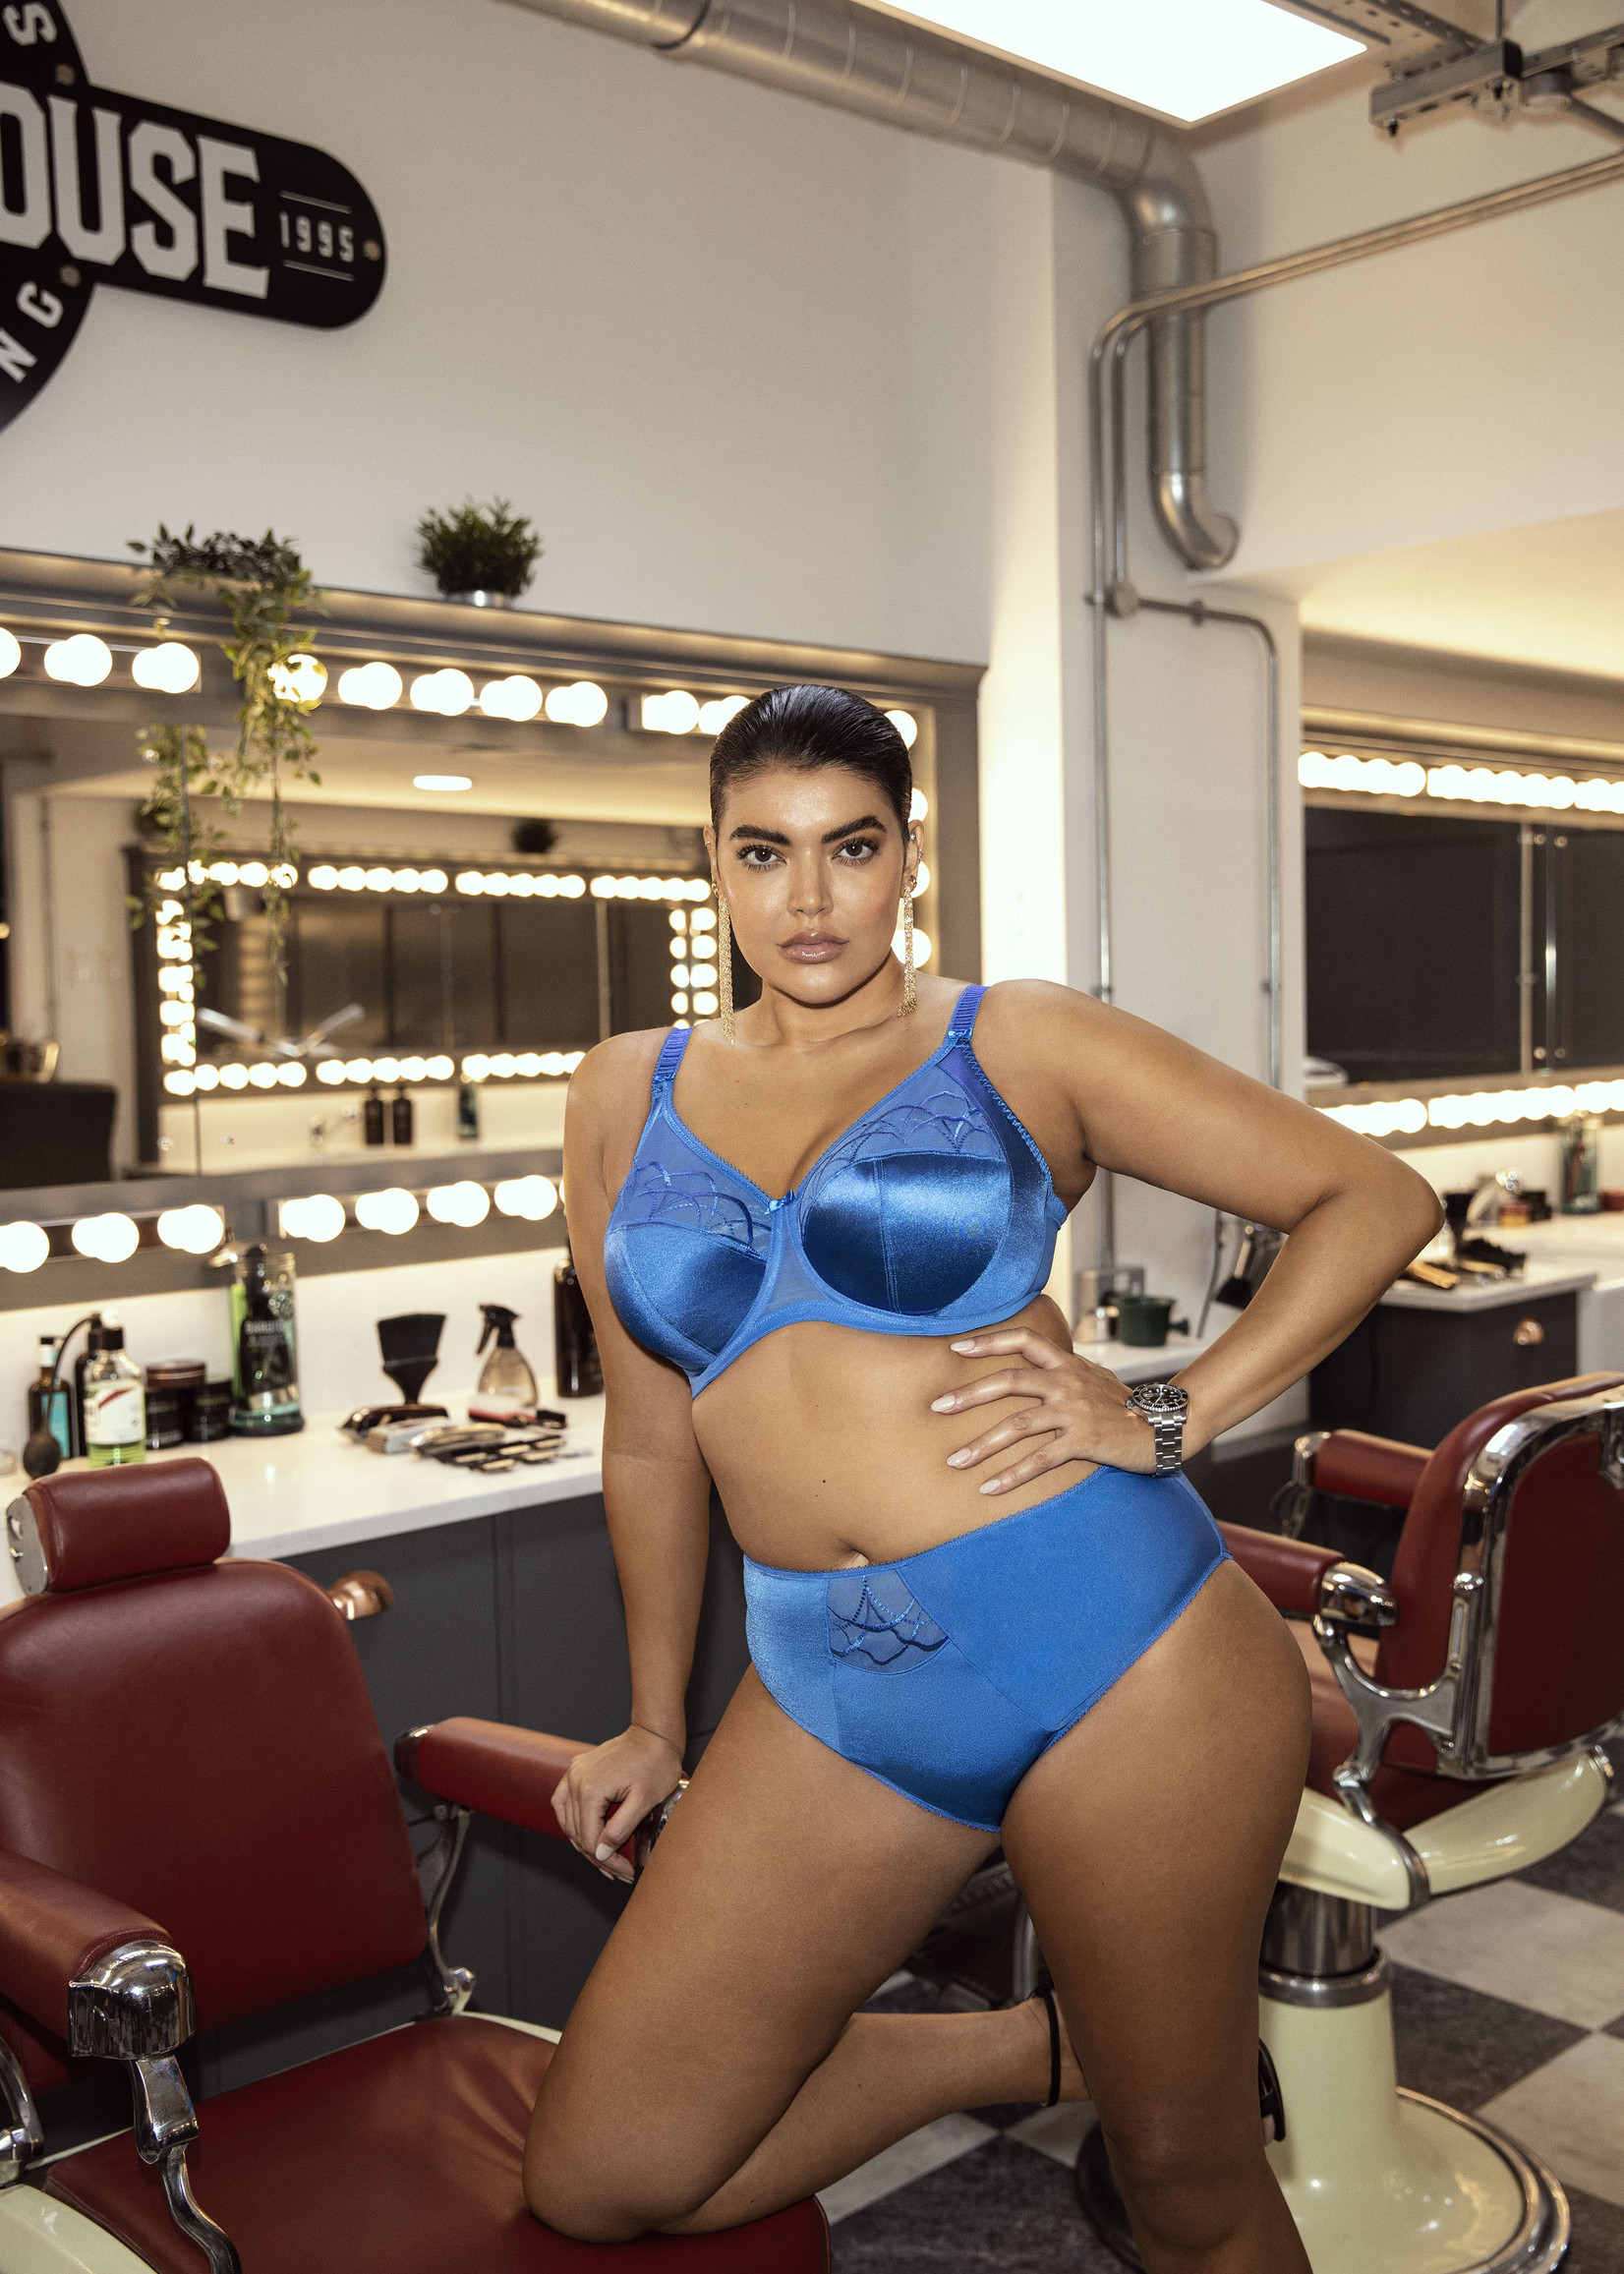 Elomi Cate Banded Underwire Bra - Tunis